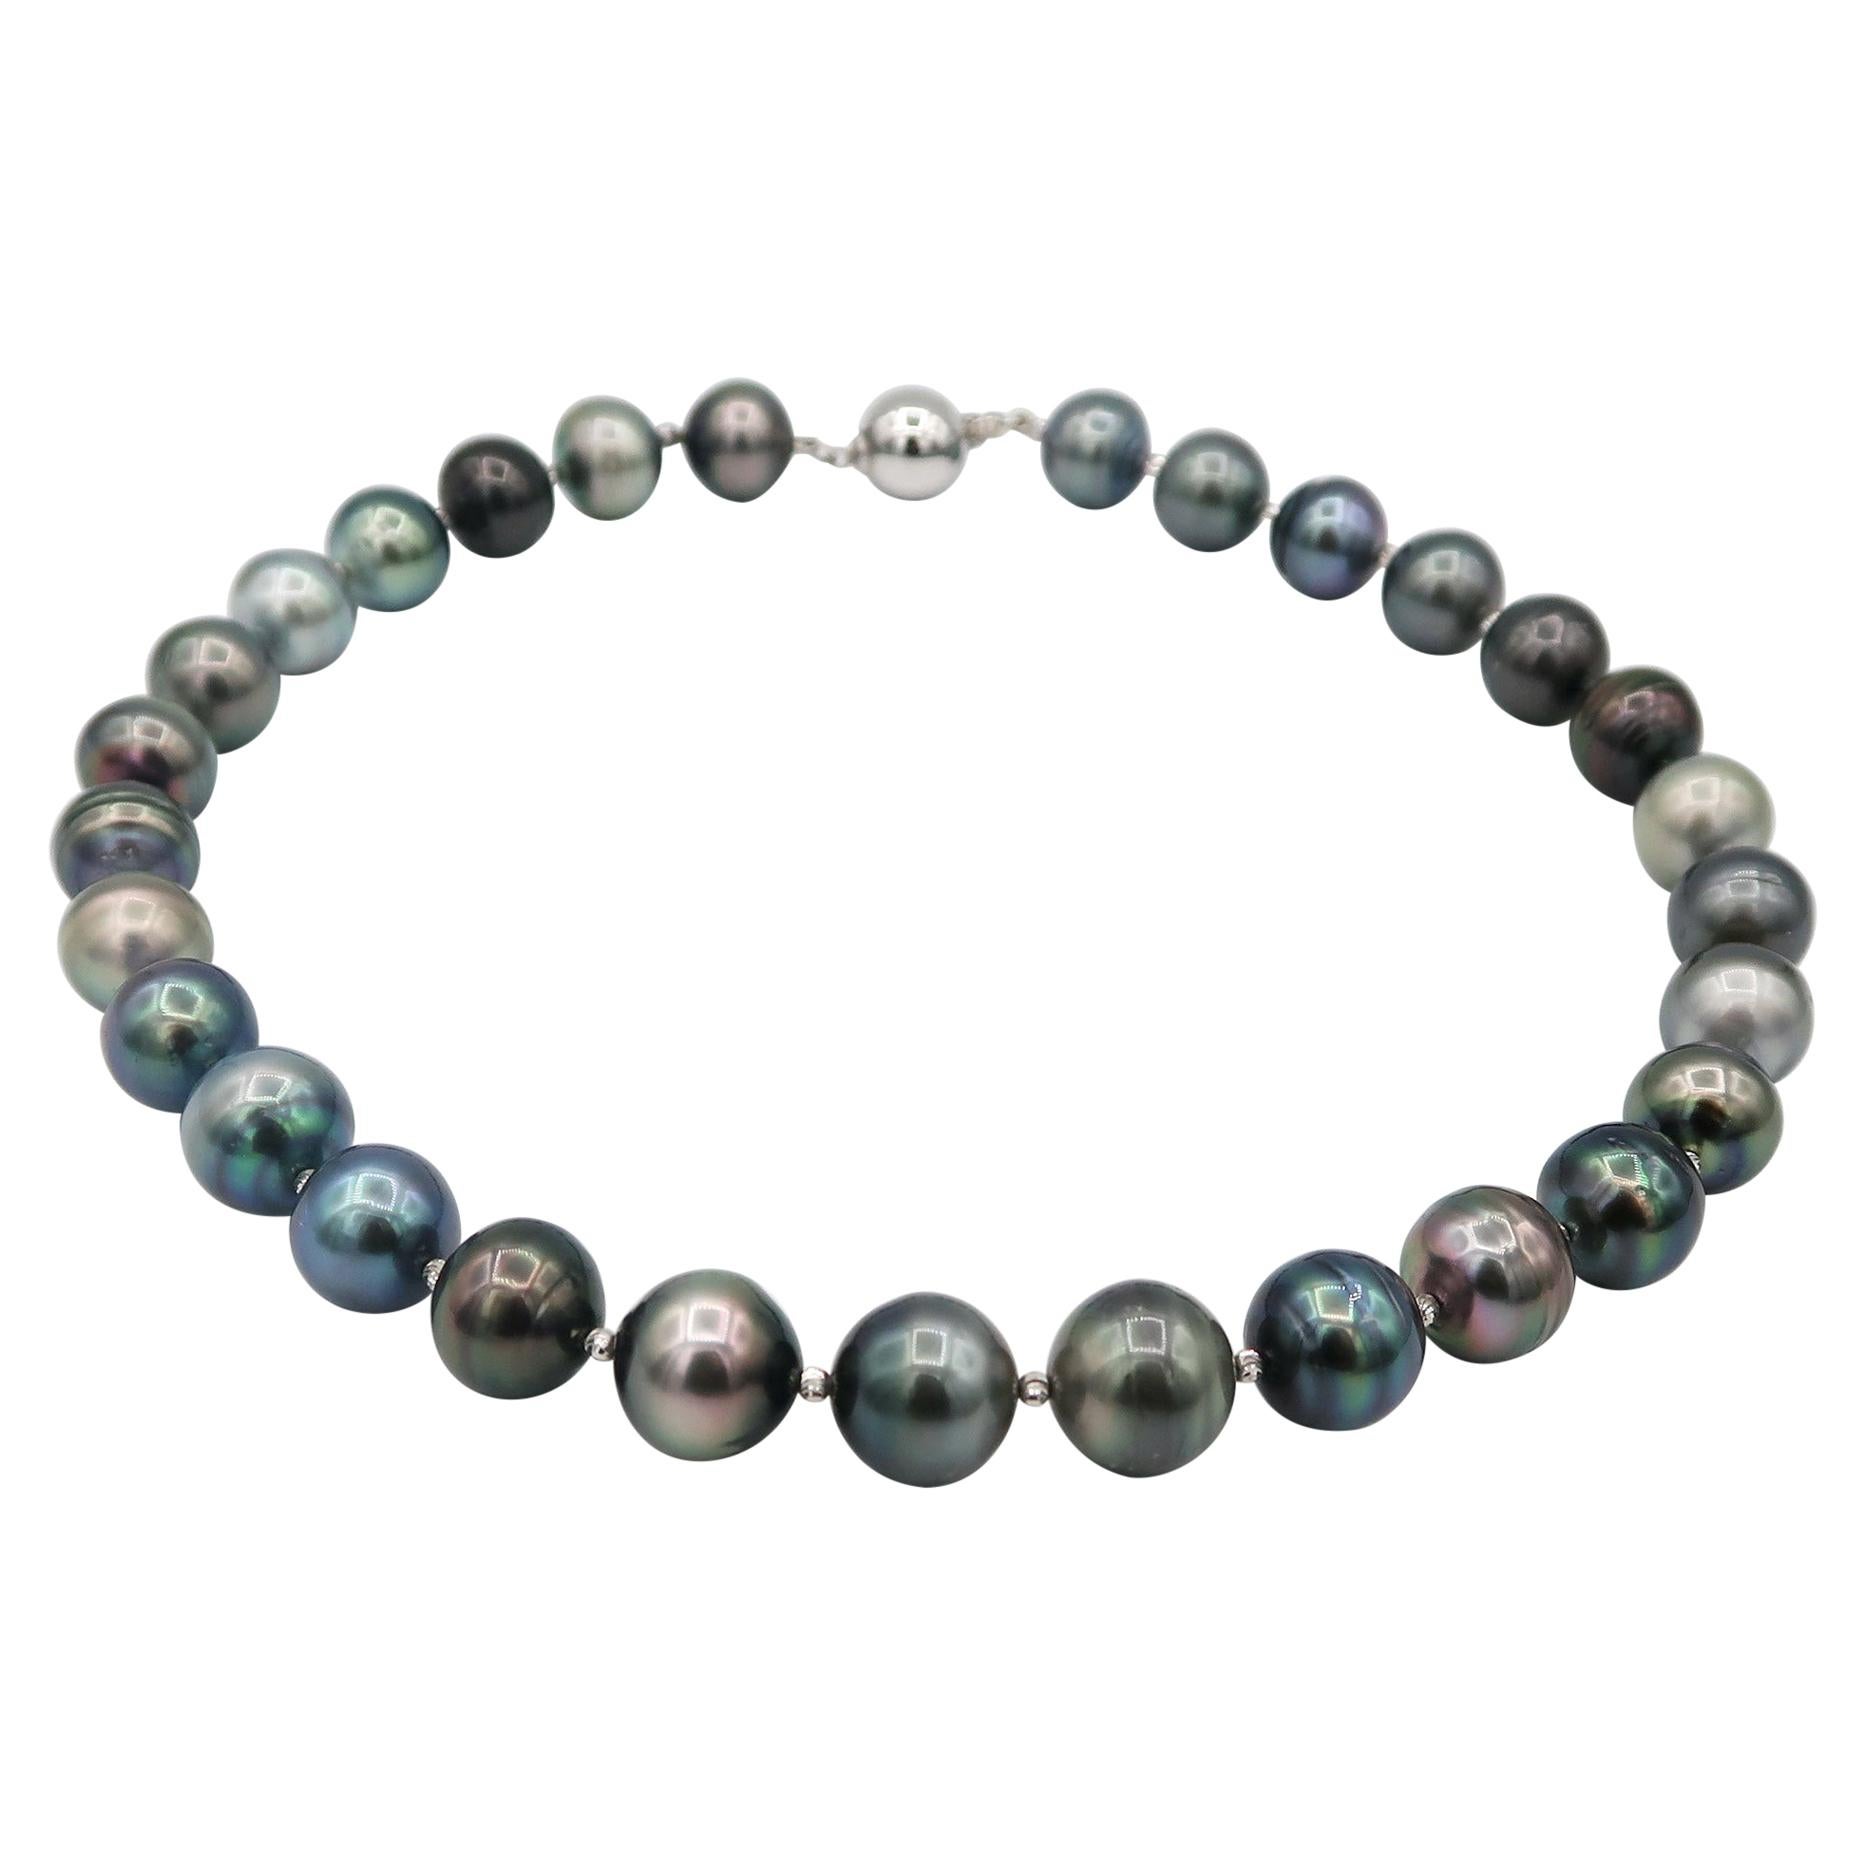 Multicolour Tahitian Pearl Necklace with Faceted 18k White Gold Beads